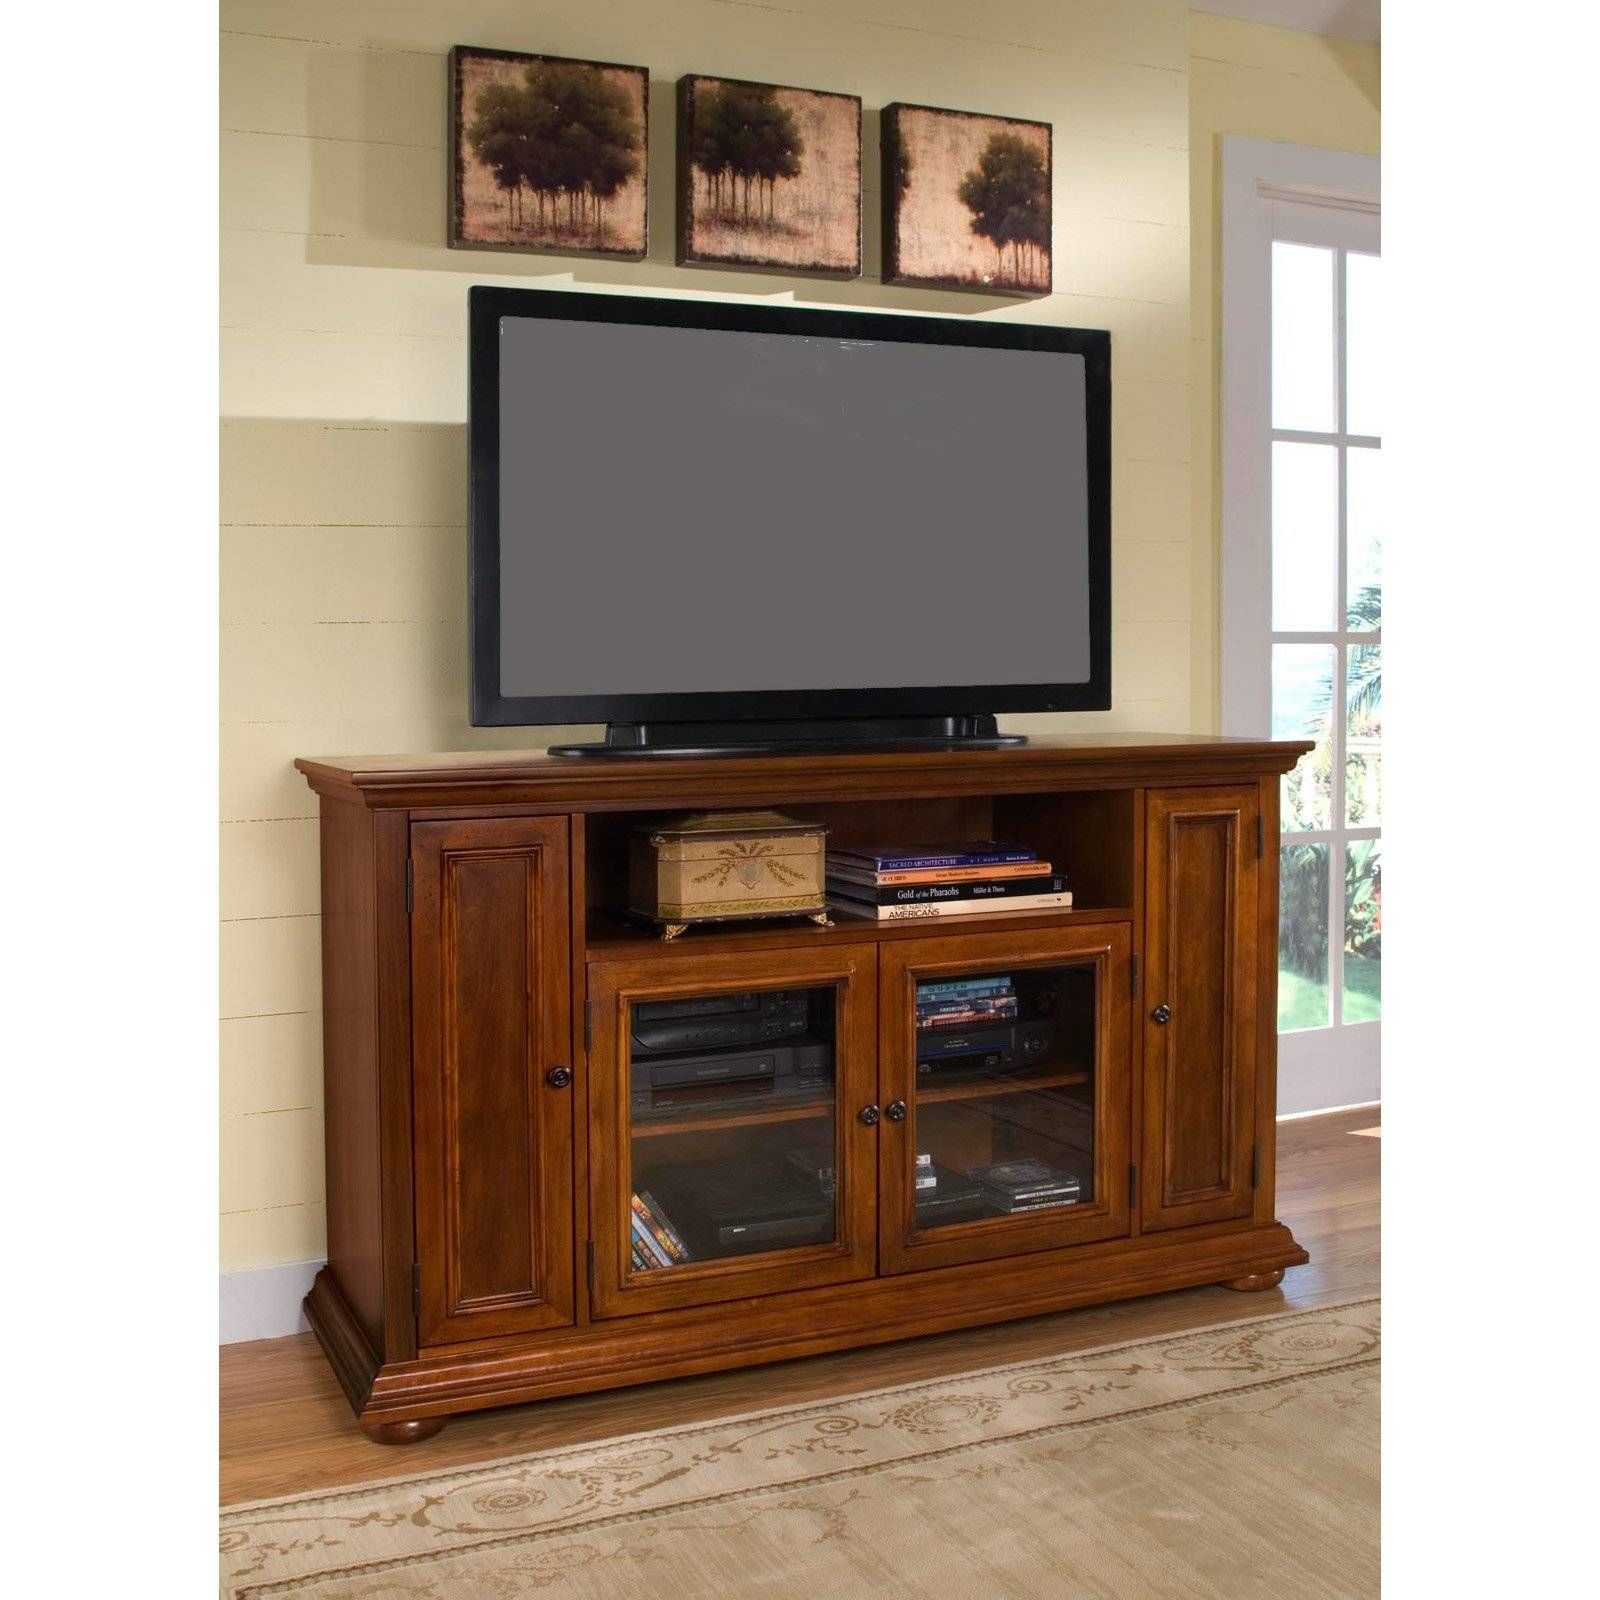 Glossy Brown Enclosed Tv Cabinets For Flat Screens With Doors Regarding Enclosed Tv Cabinets With Doors (View 10 of 15)